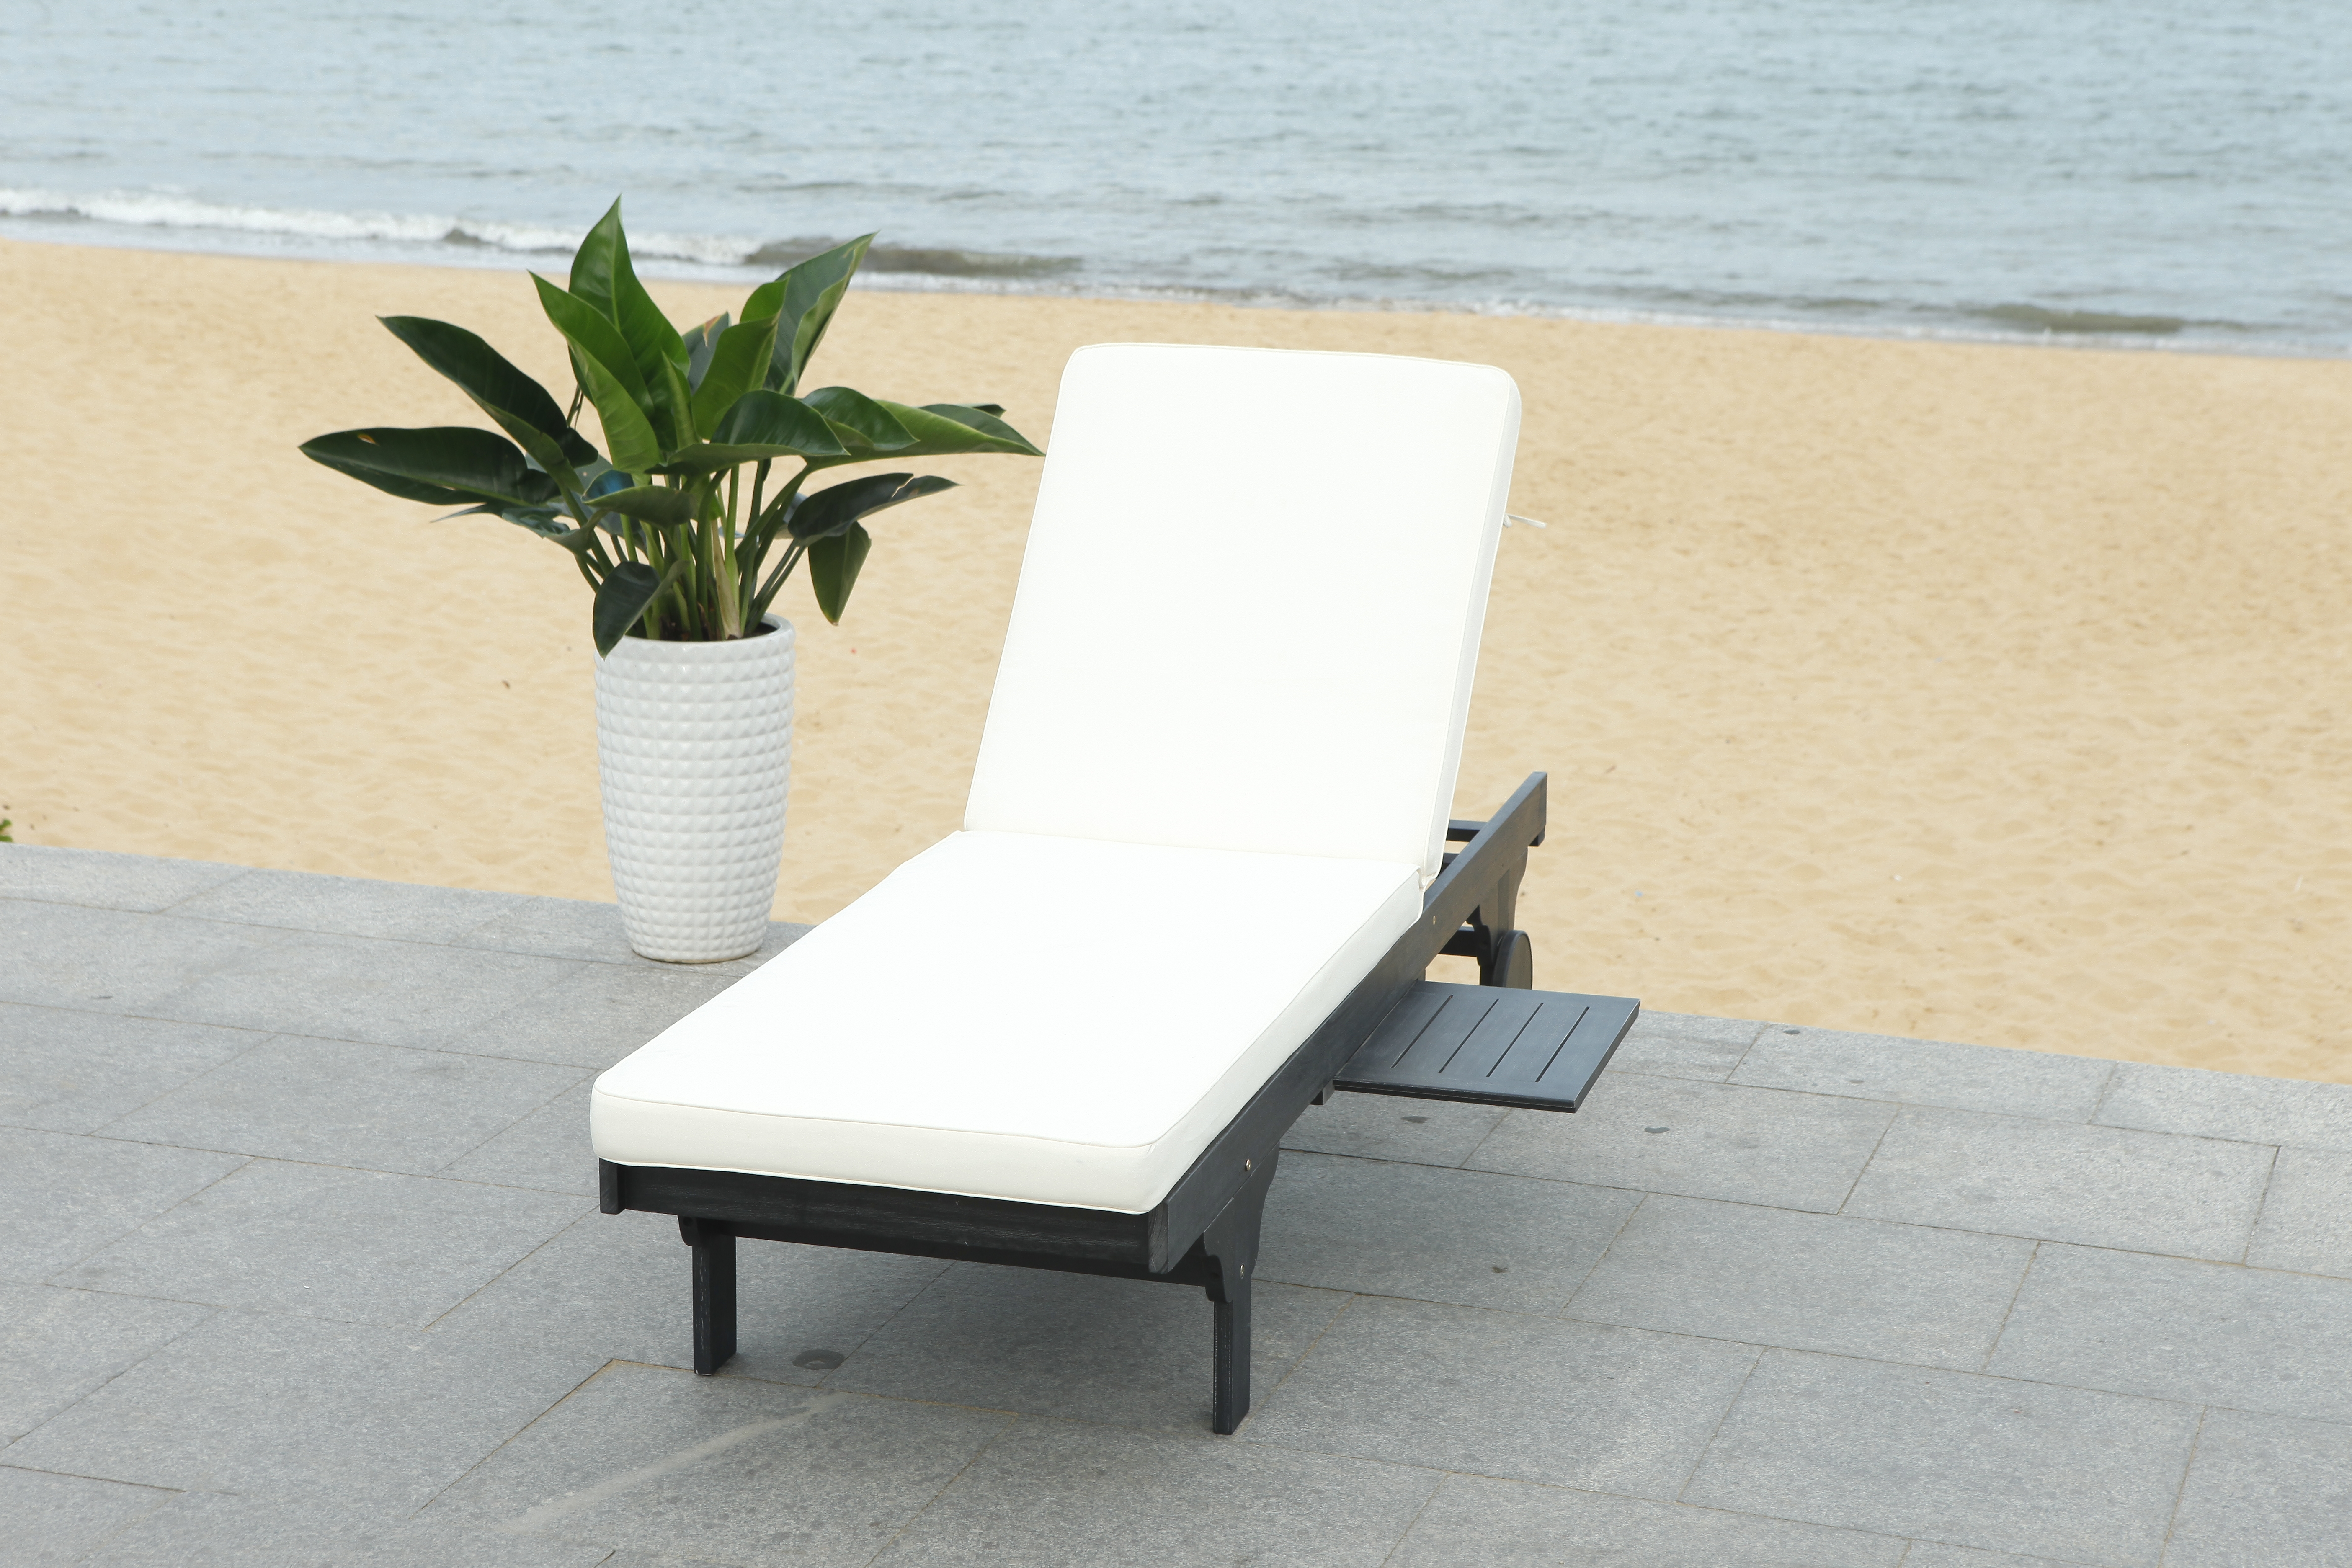 Newport Chaise Lounge Chair With Side Table, Black & White - Image 7